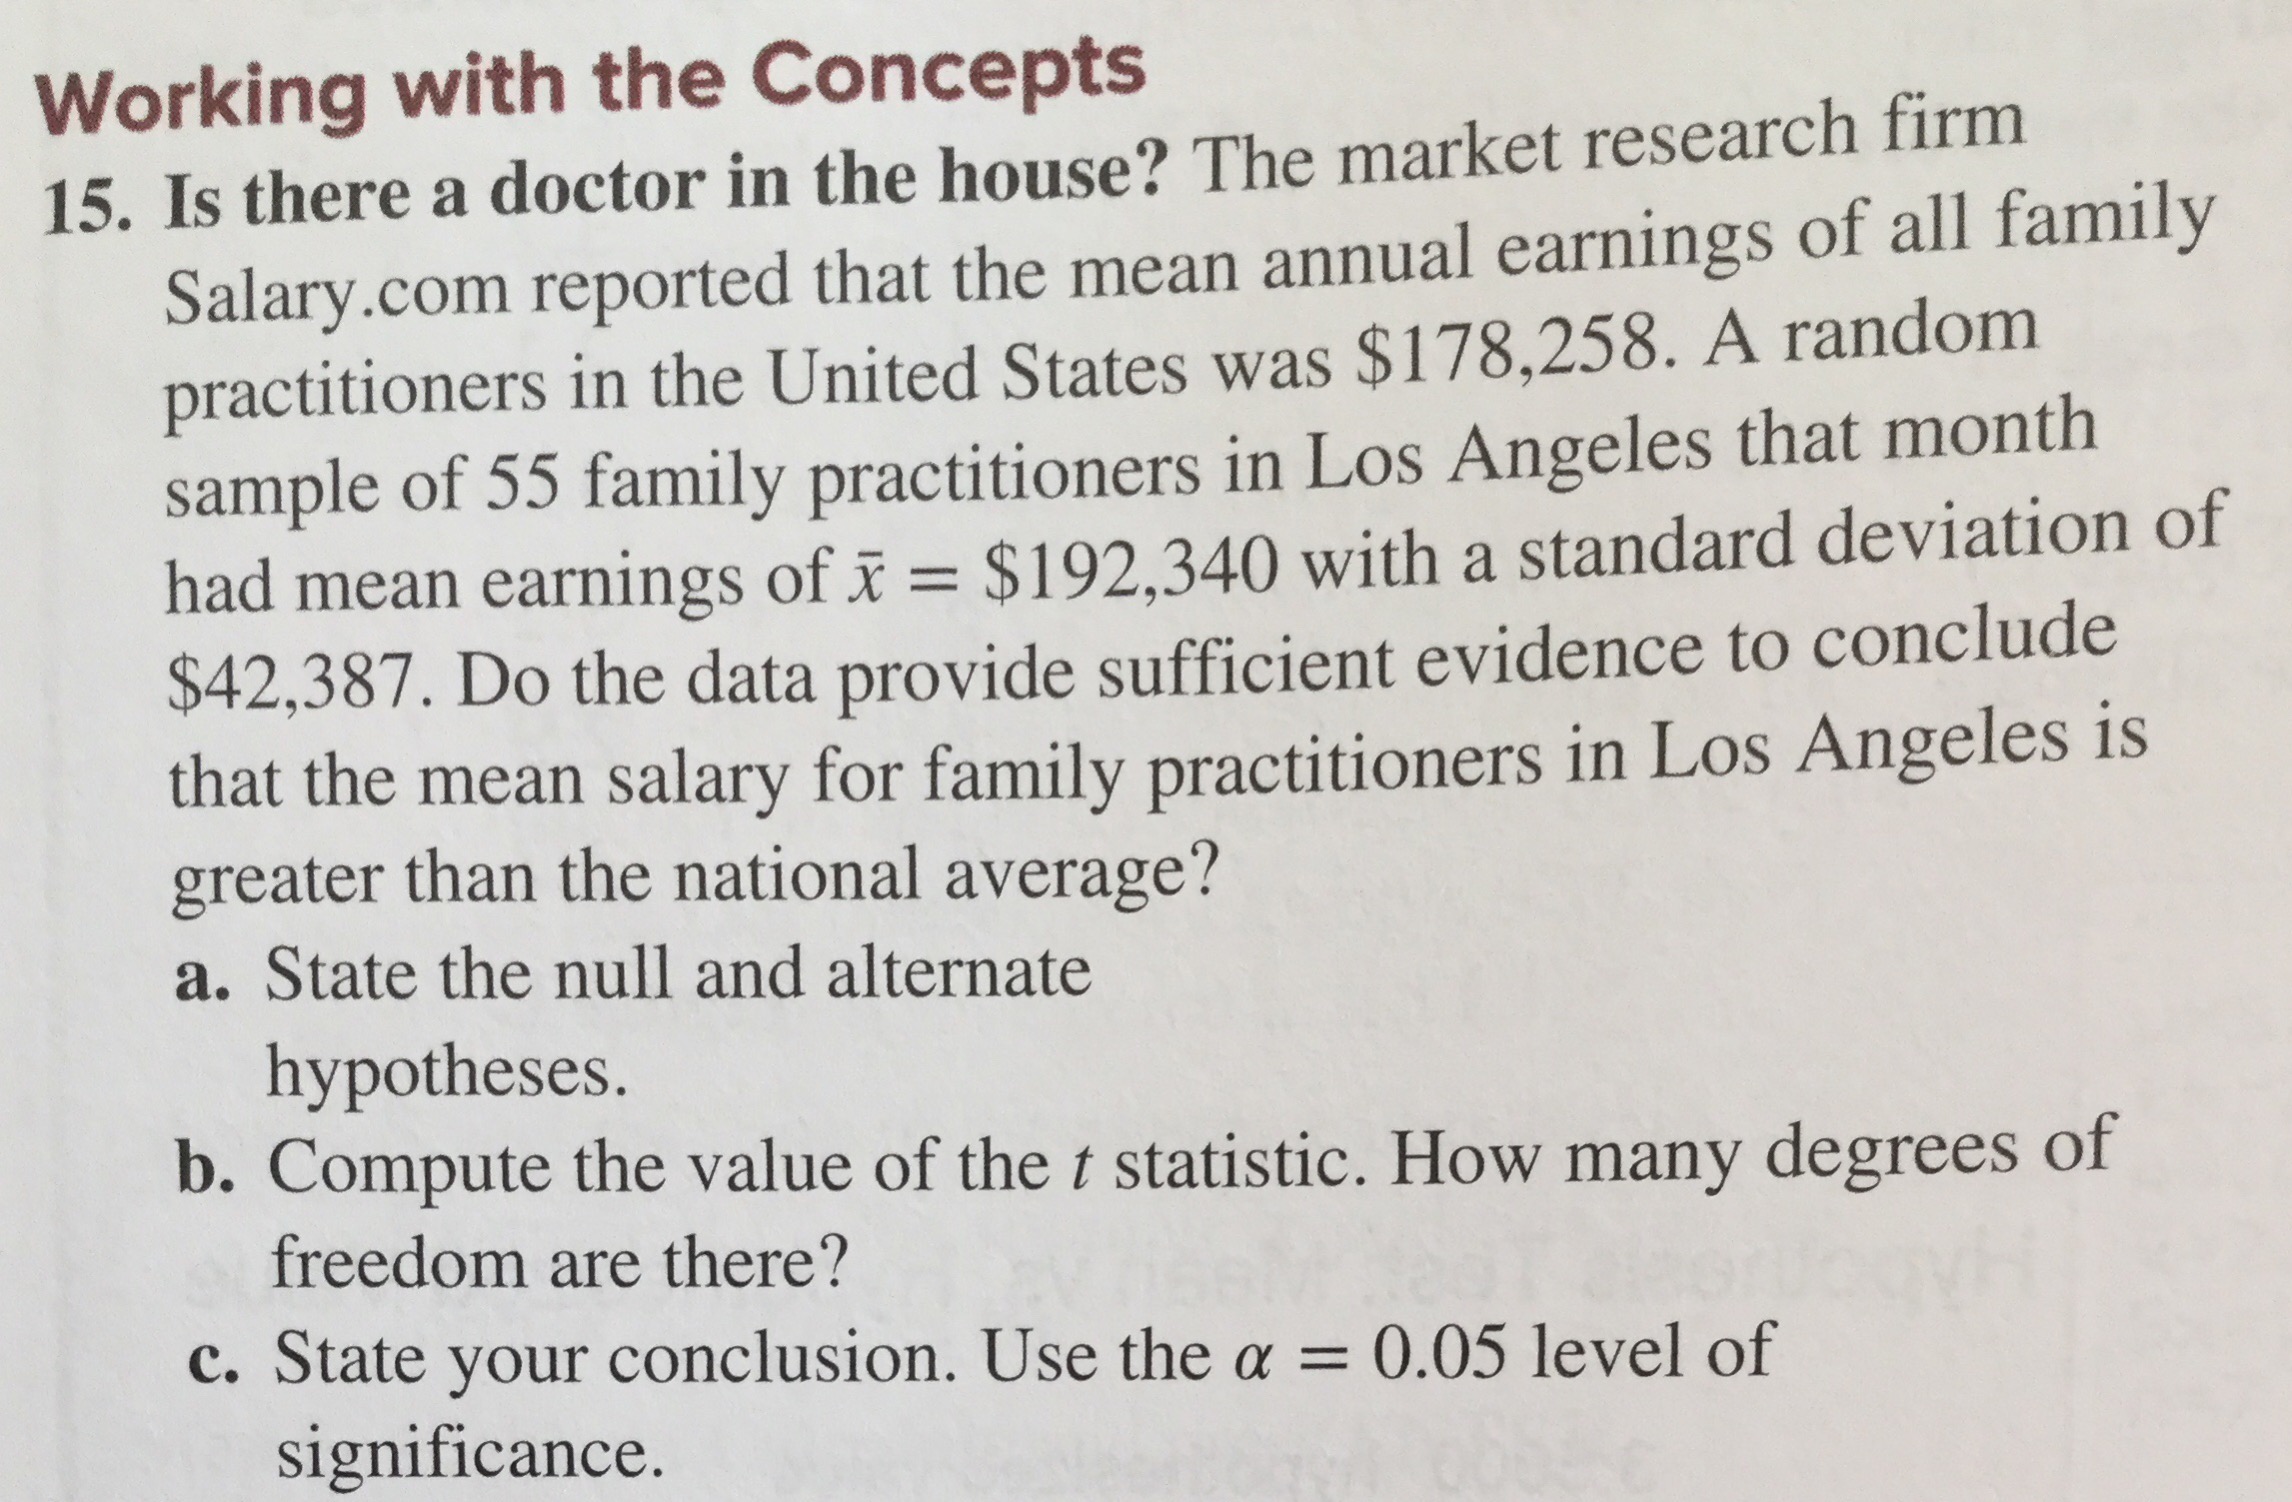 Working with the Concepts
15. Is there a doctor in the house? The market research firm
Salary.com reported that the mean annual earnings of all family
practitioners in the United States was $178,258. A random
sample of 55 family practitioners in Los Angeles that month
had mean earnings of i $192,340 with a standard deviation of
$42,387. Do the data provide sufficient evidence to conclude
that the mean salary for family practitioners in Los Angeles is
greater than the national average?
State the null and alternate
hypotheses.
b. Compute the value of the t statistic. How many degrees of
freedom are there?
c. State your conclusion. Use the a = 0.05 level of
significance.
